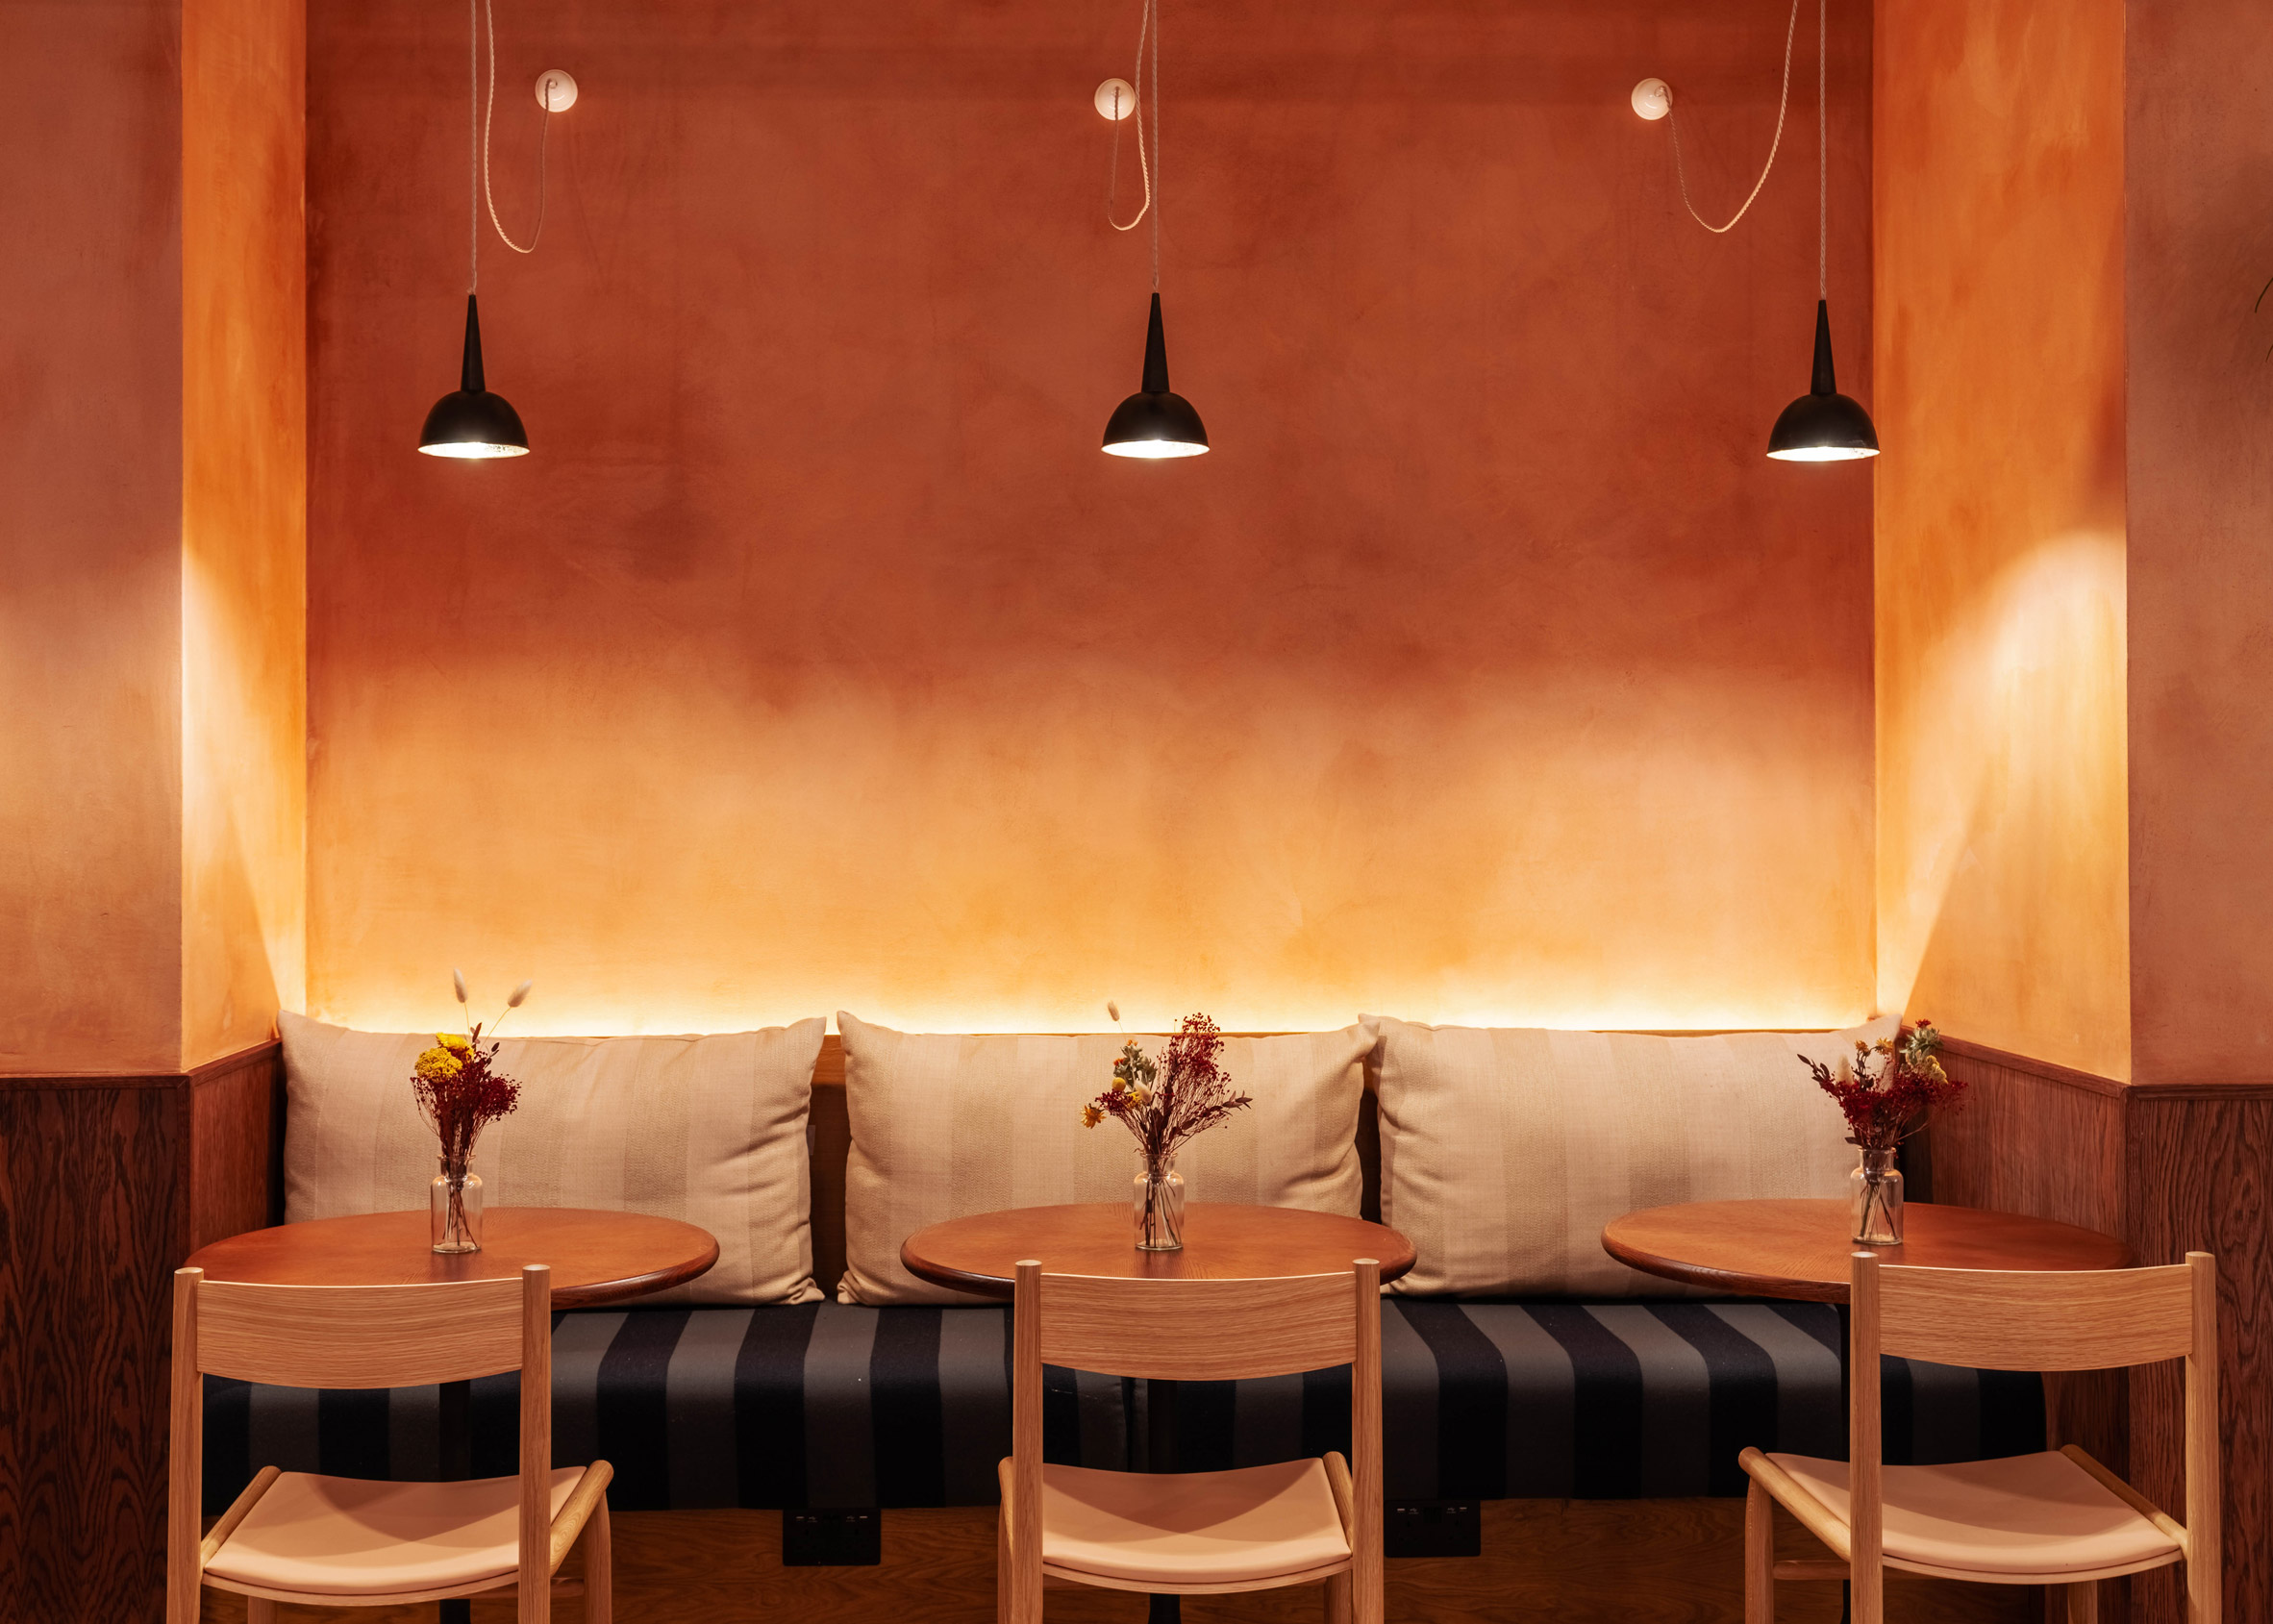 Restaurant interior with an orange ombre wall, black pendant lights, bench seating and wooden tables and chairs